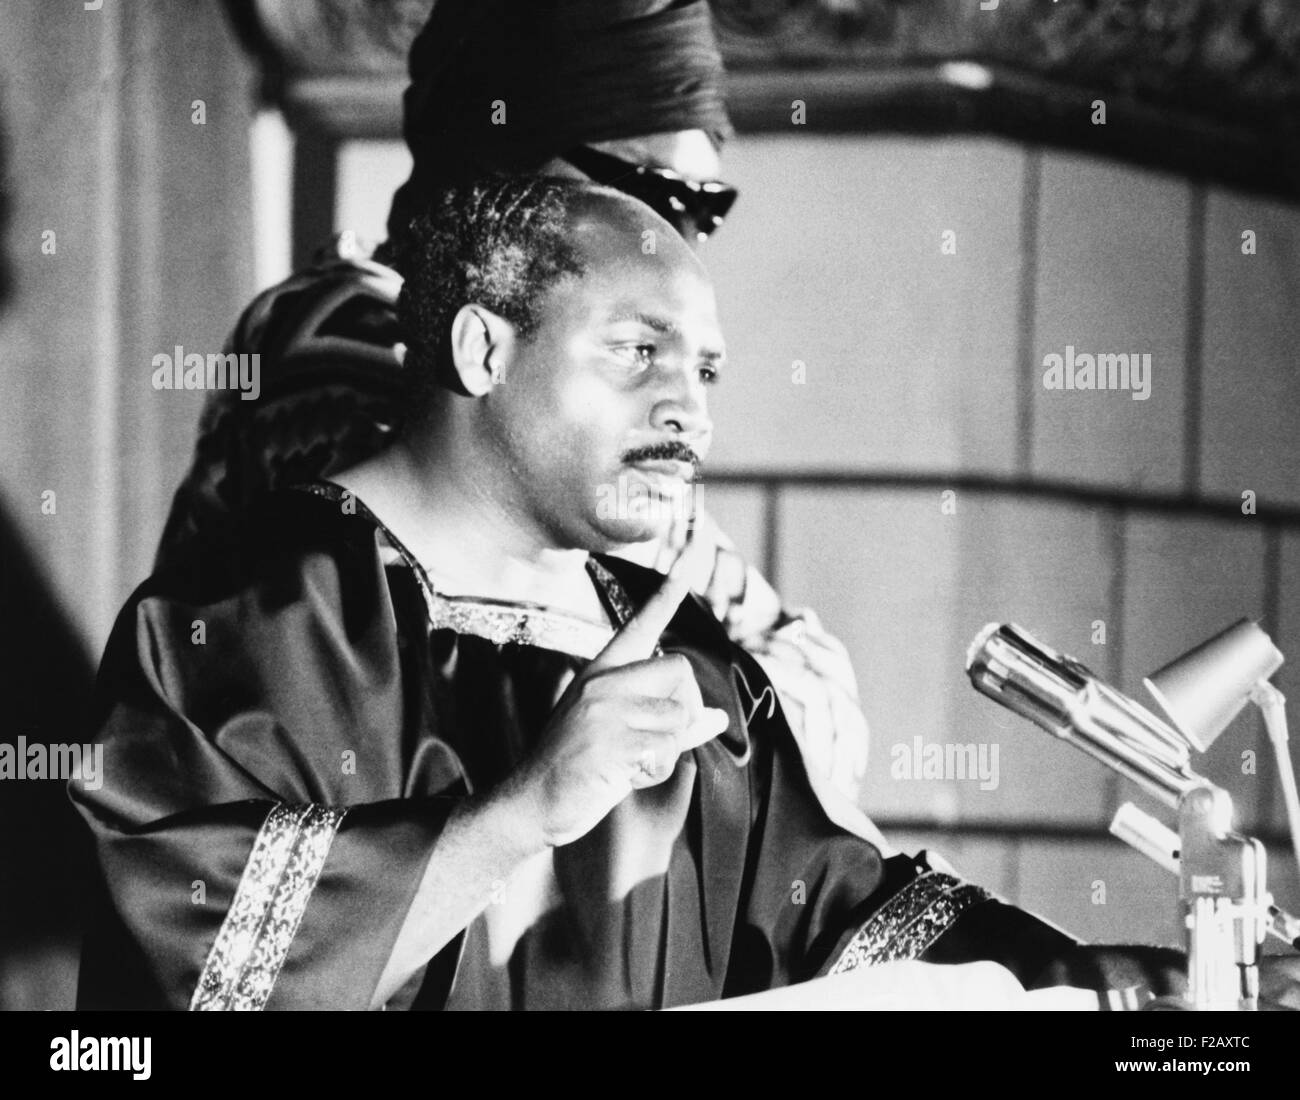 David Hill of House of Israel speaks at 'Operation Black Unity' rally. Cleveland, Ohio. August 1969. He fleeced his followers with phony scheme to boycott MacDonald's and start a competing Black owned fast food franchise. (CSU 2015 9 971) Stock Photo